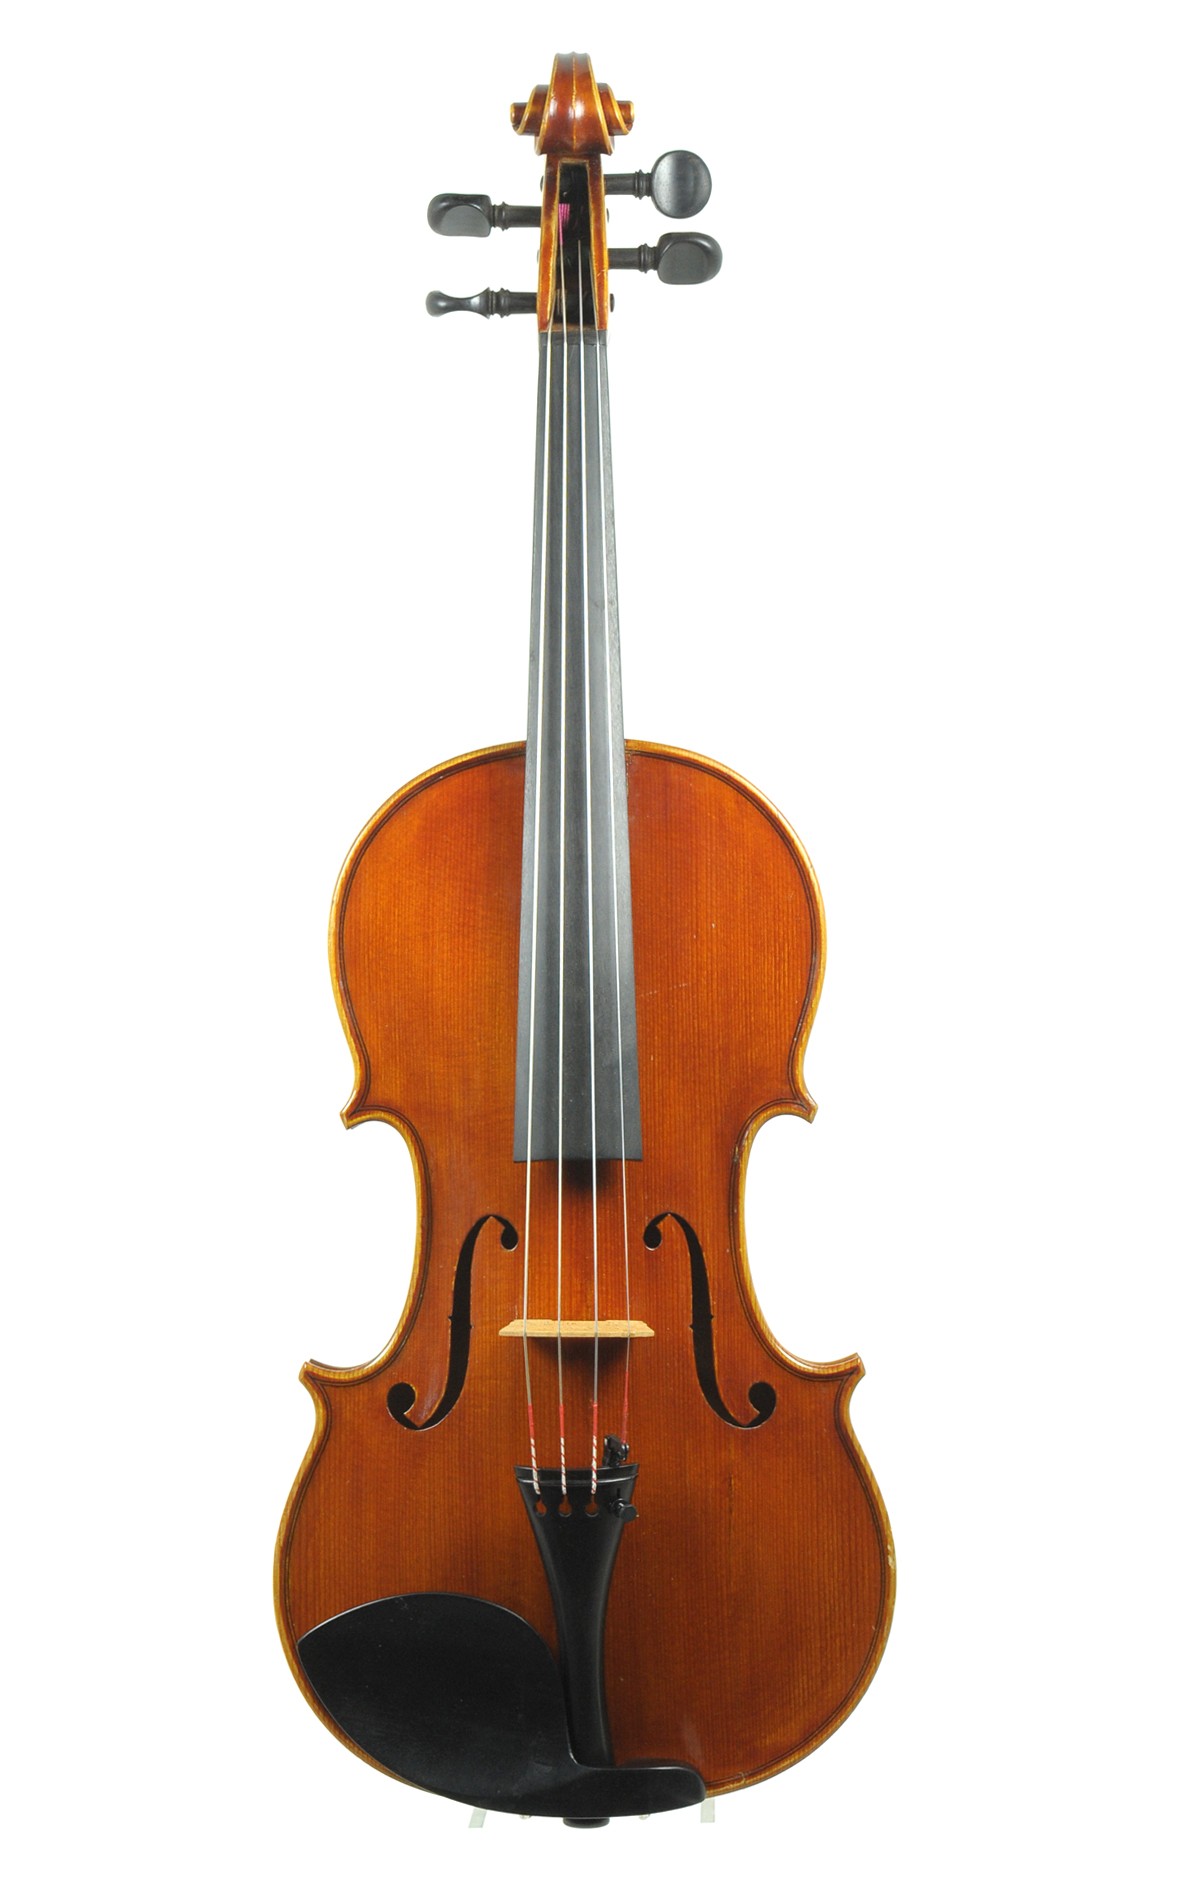 Modern violin from Italy - top